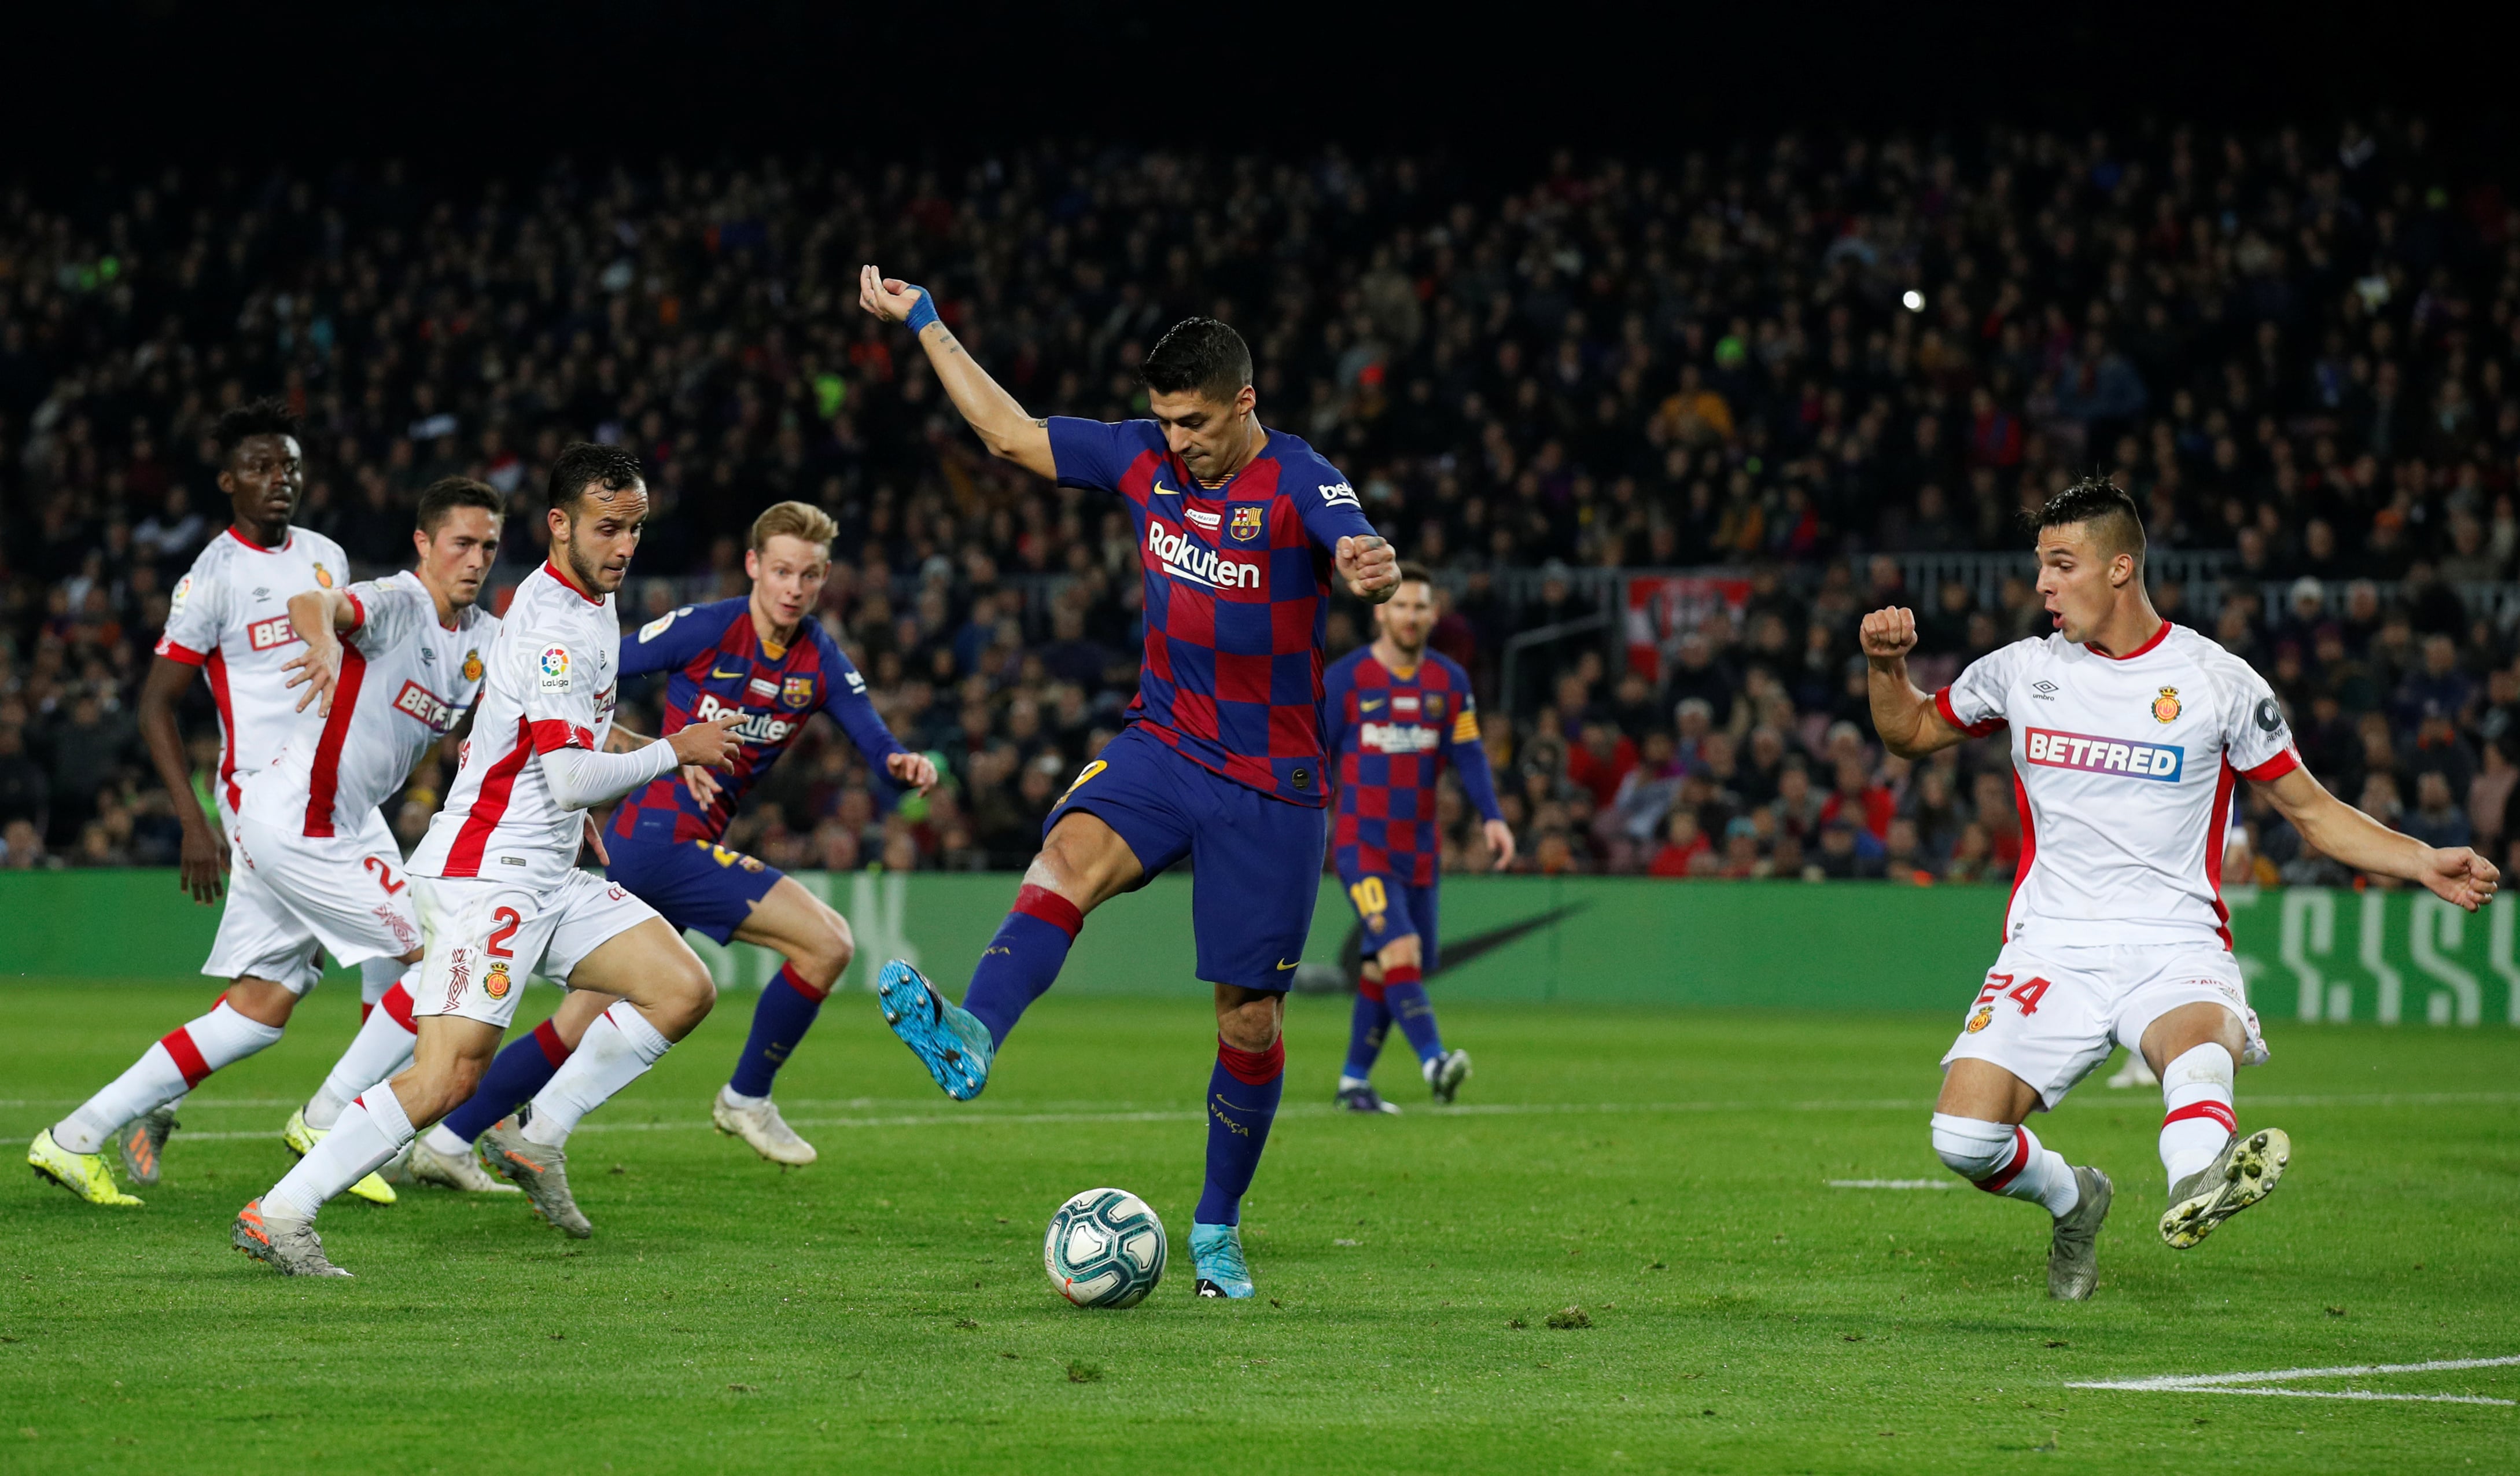 Luis Suárez contorts his body to score an incredible back-heel goal against Mallorca (by REUTERS/Albert Gea)